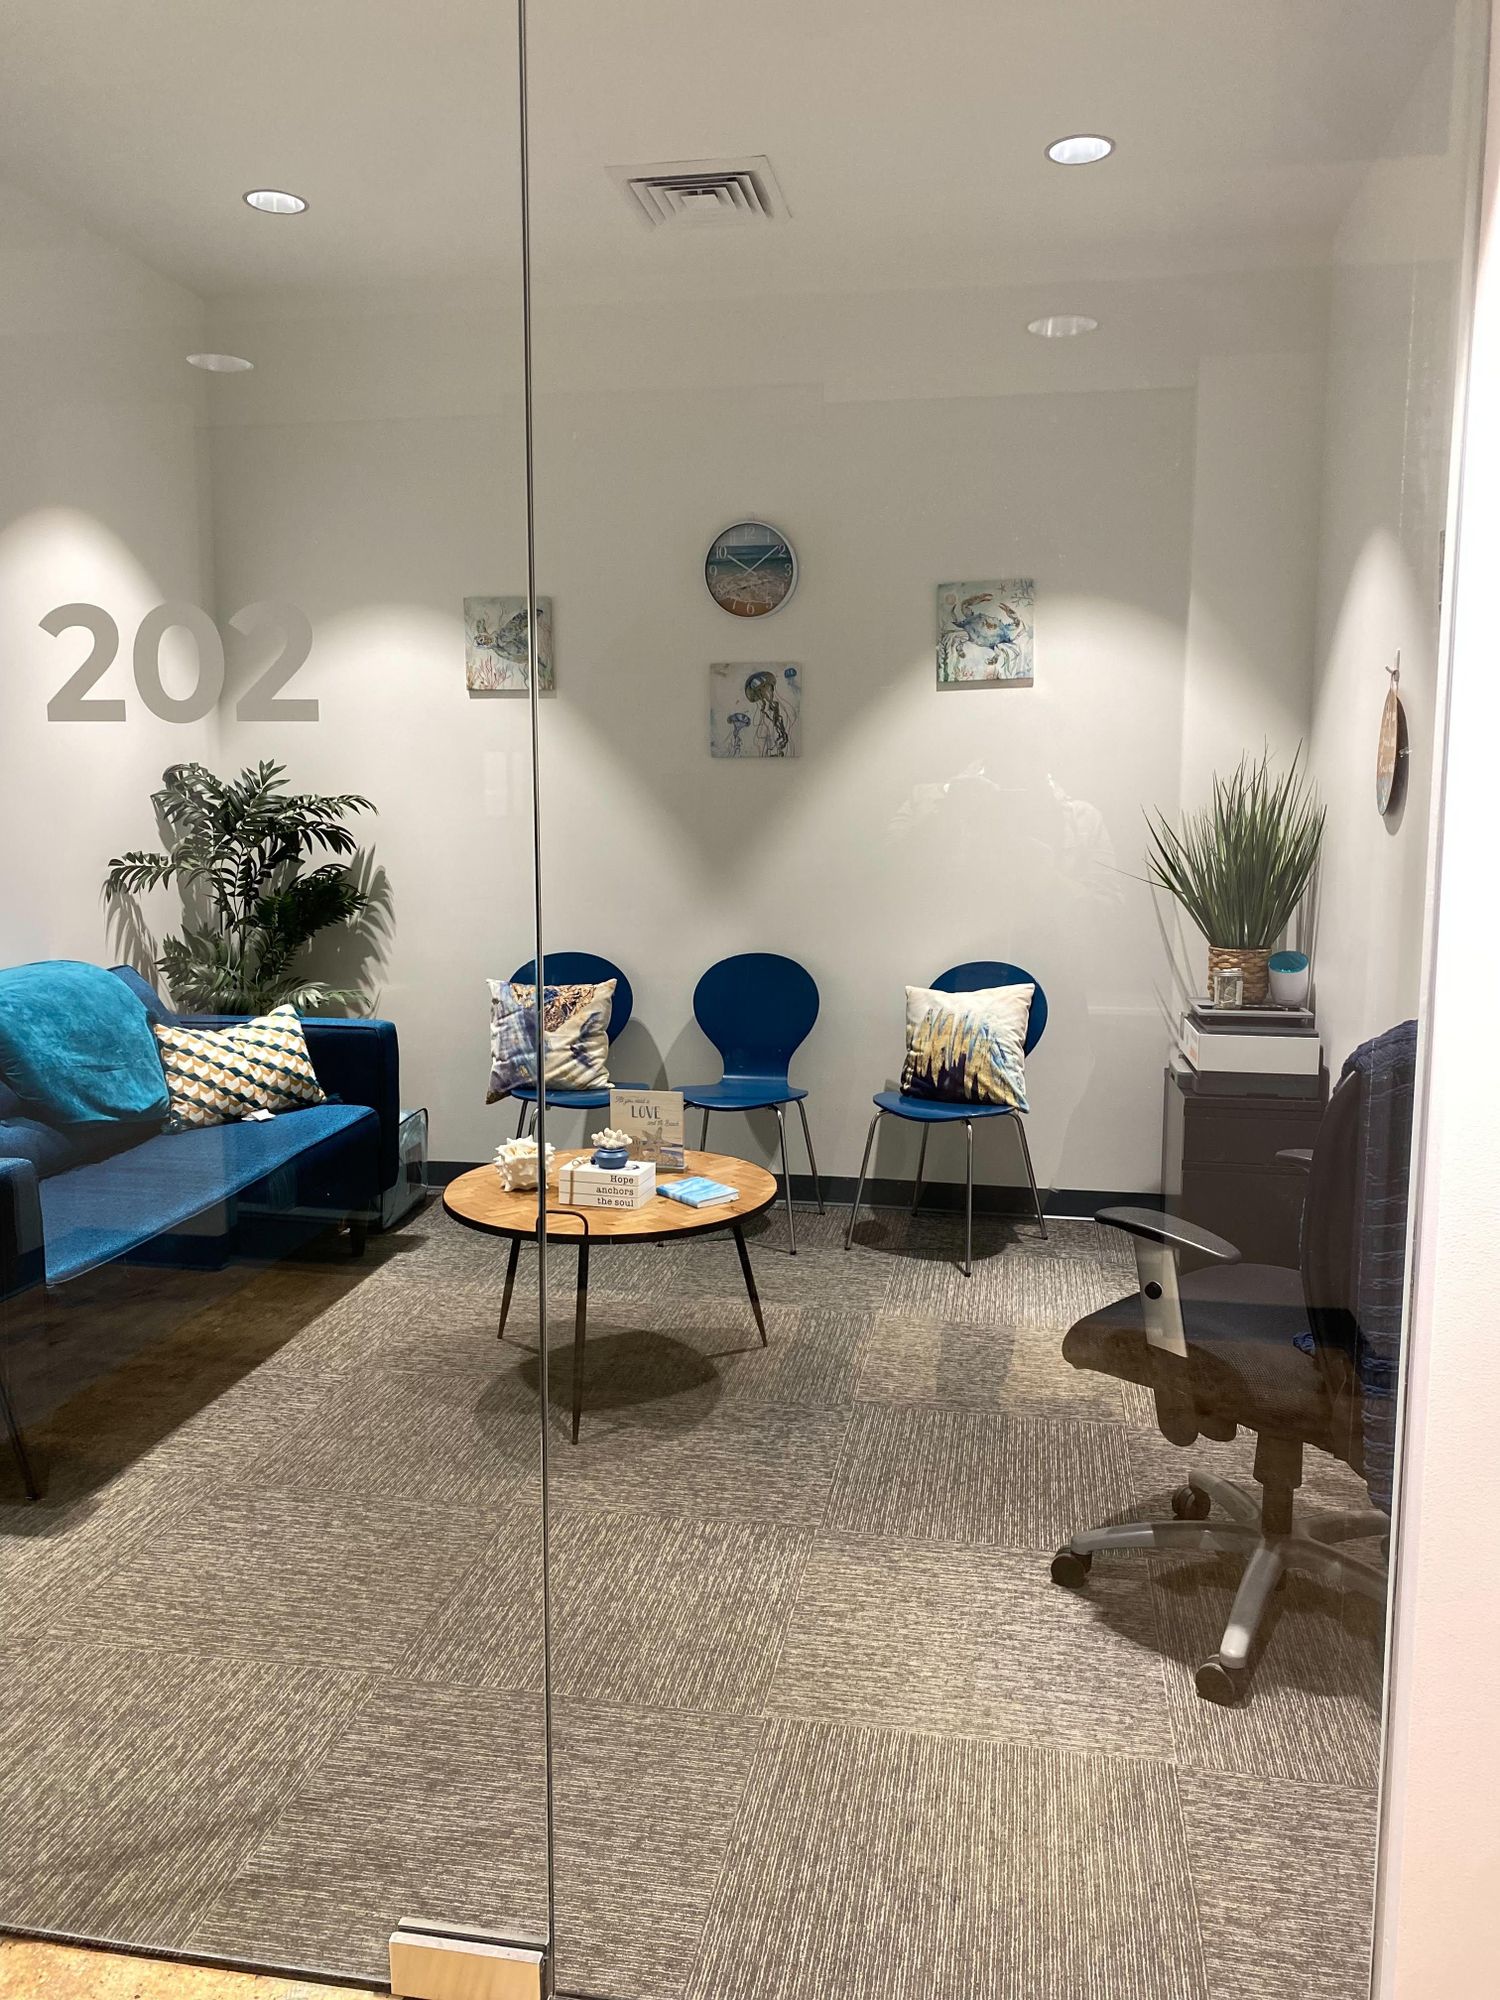 Gallery Photo of The Wellness Room